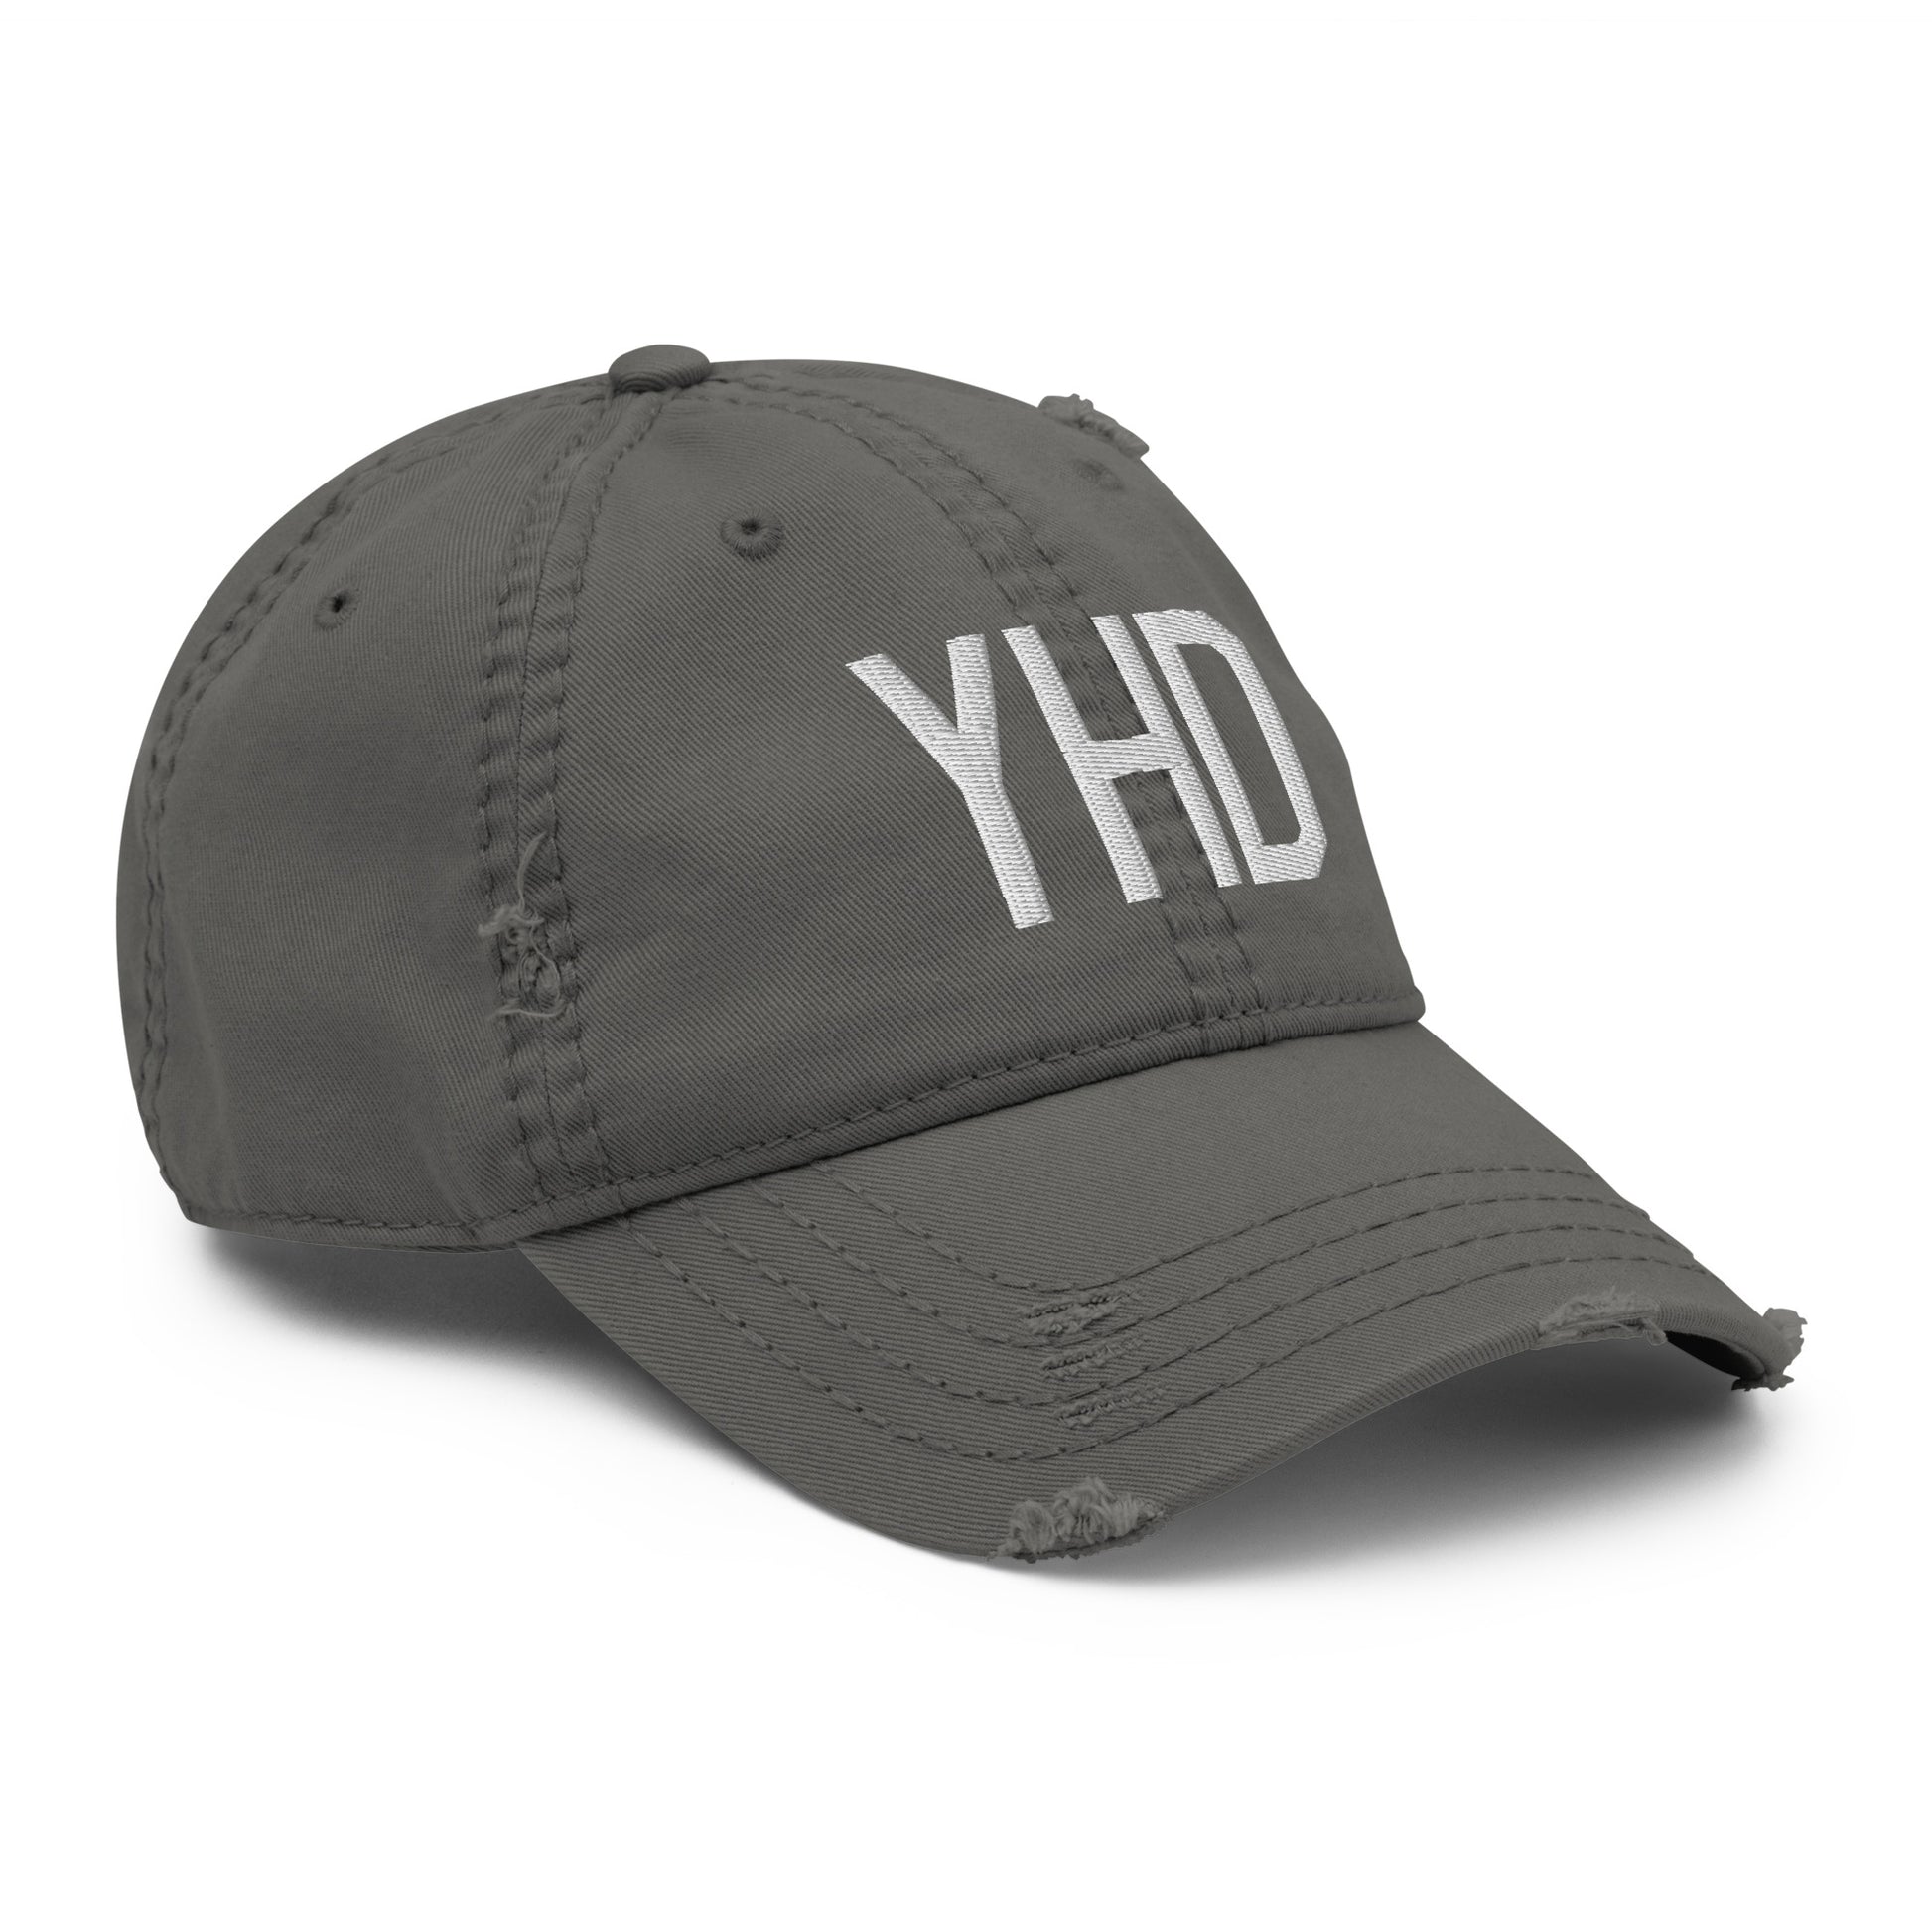 Airport Code Distressed Hat - White • YHD Dryden • YHM Designs - Image 17